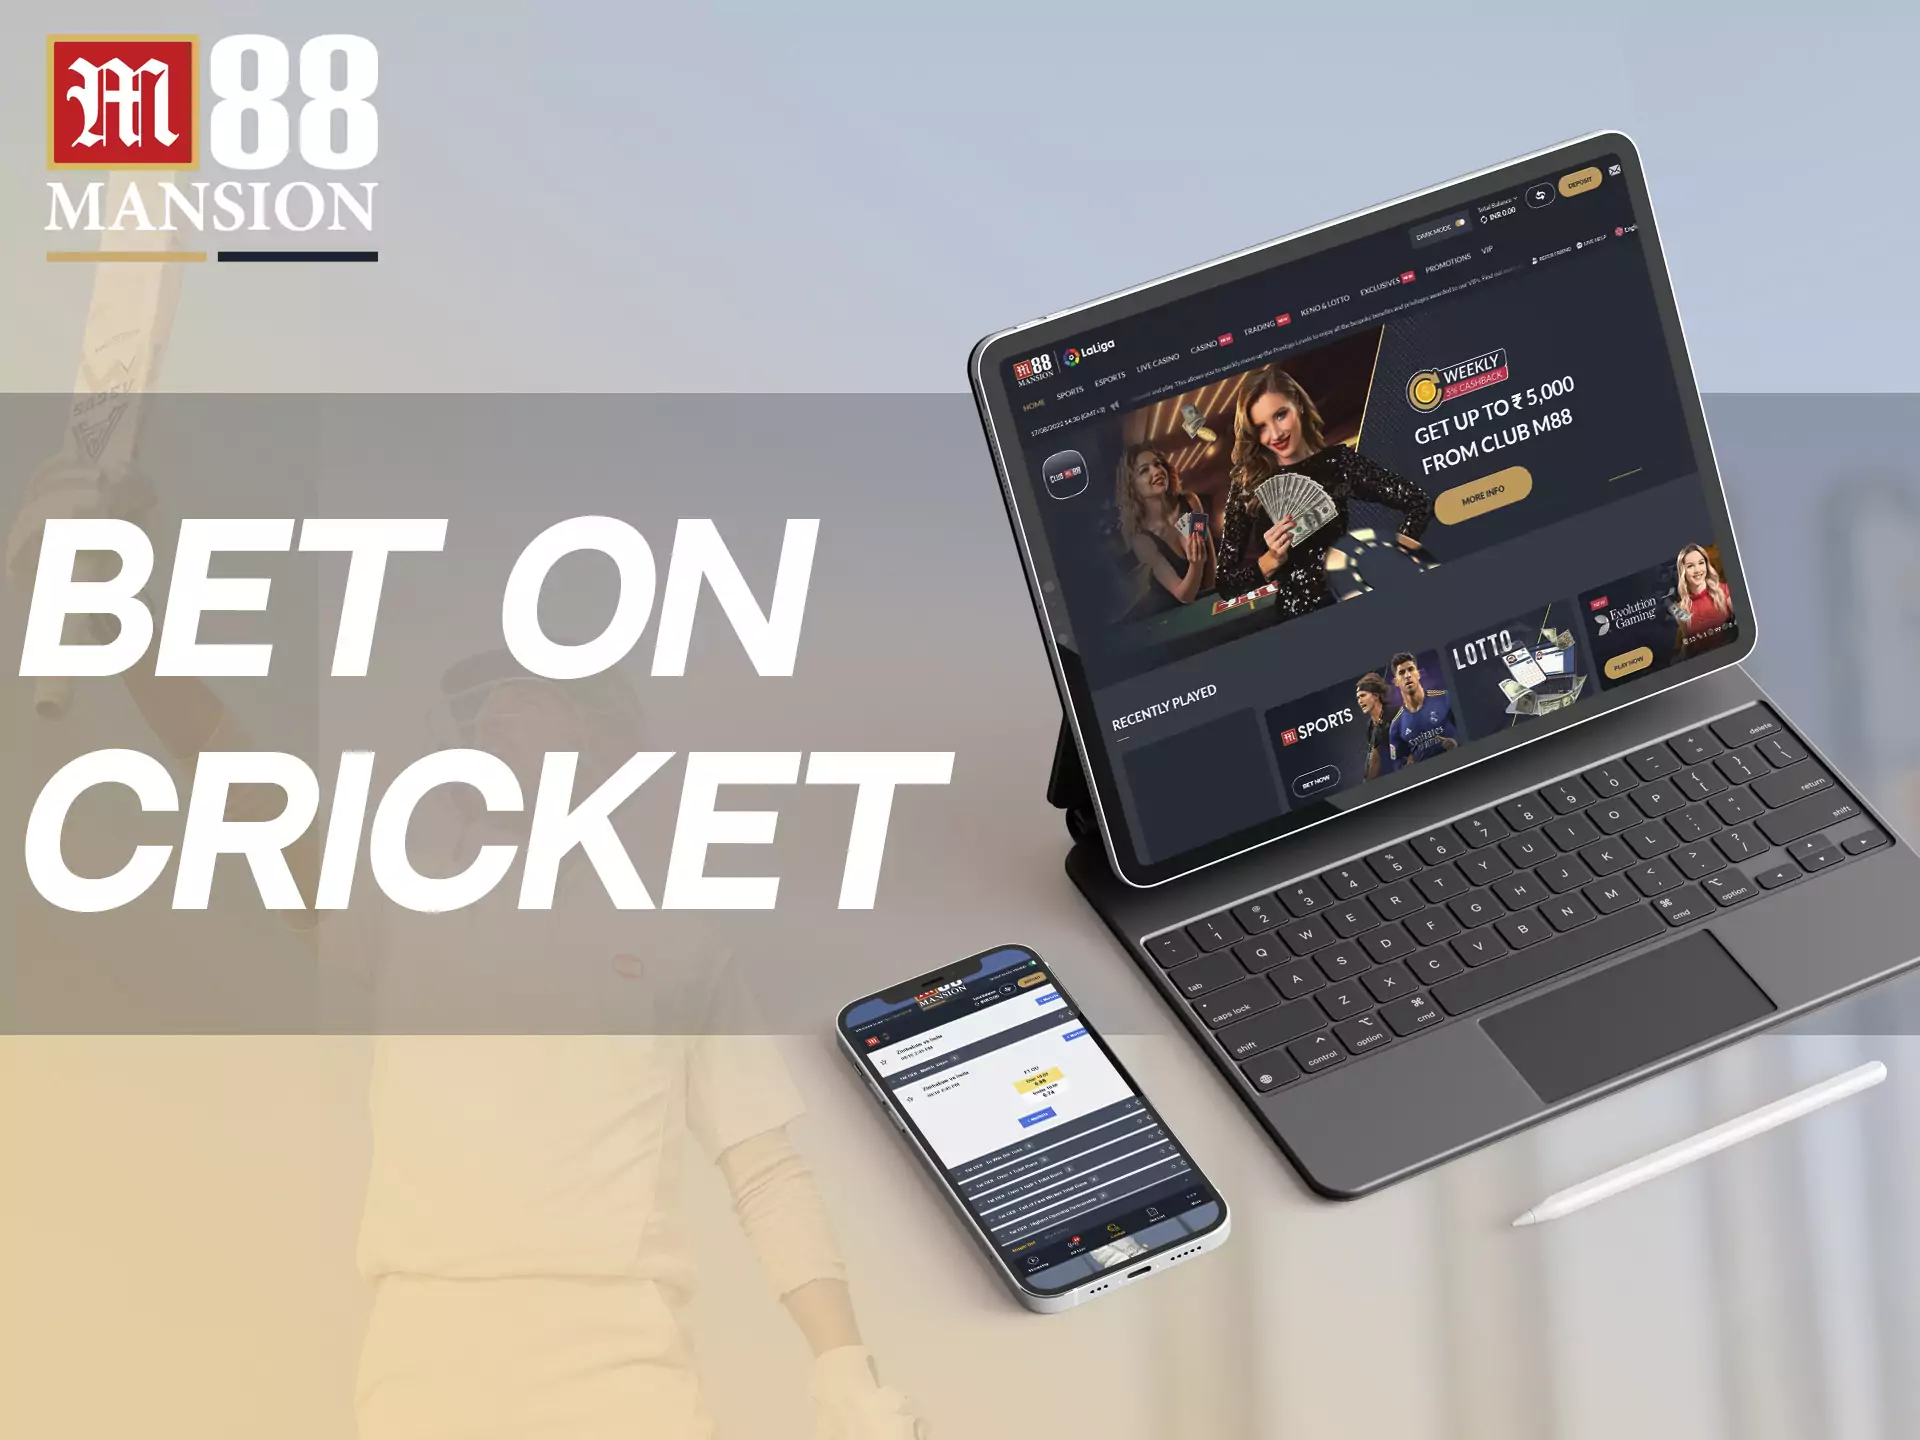 Cricket betting is the most popular activity among Indian users of M88.